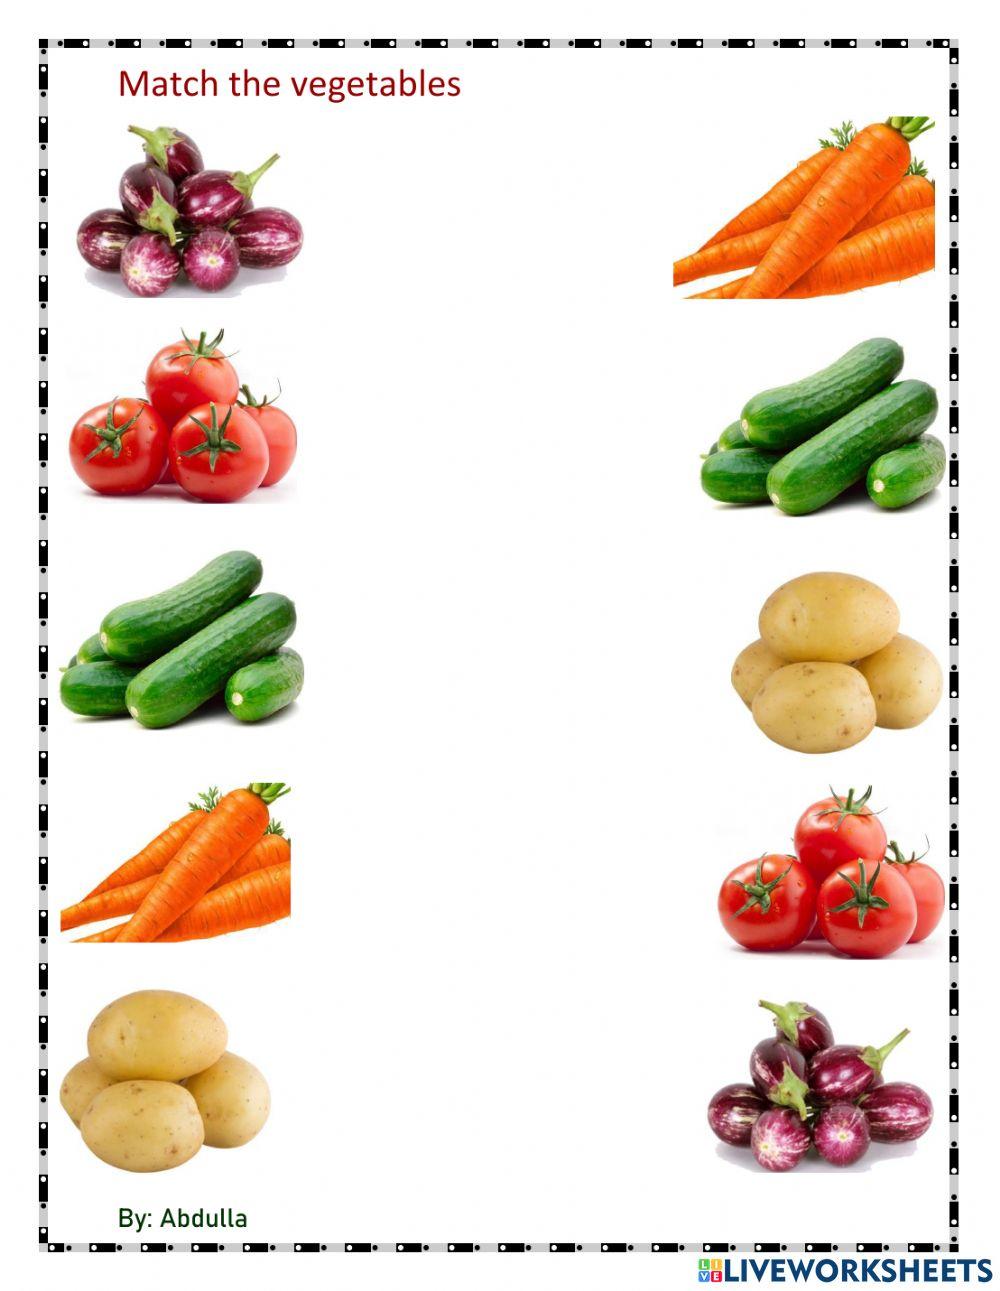 Match the vegetables